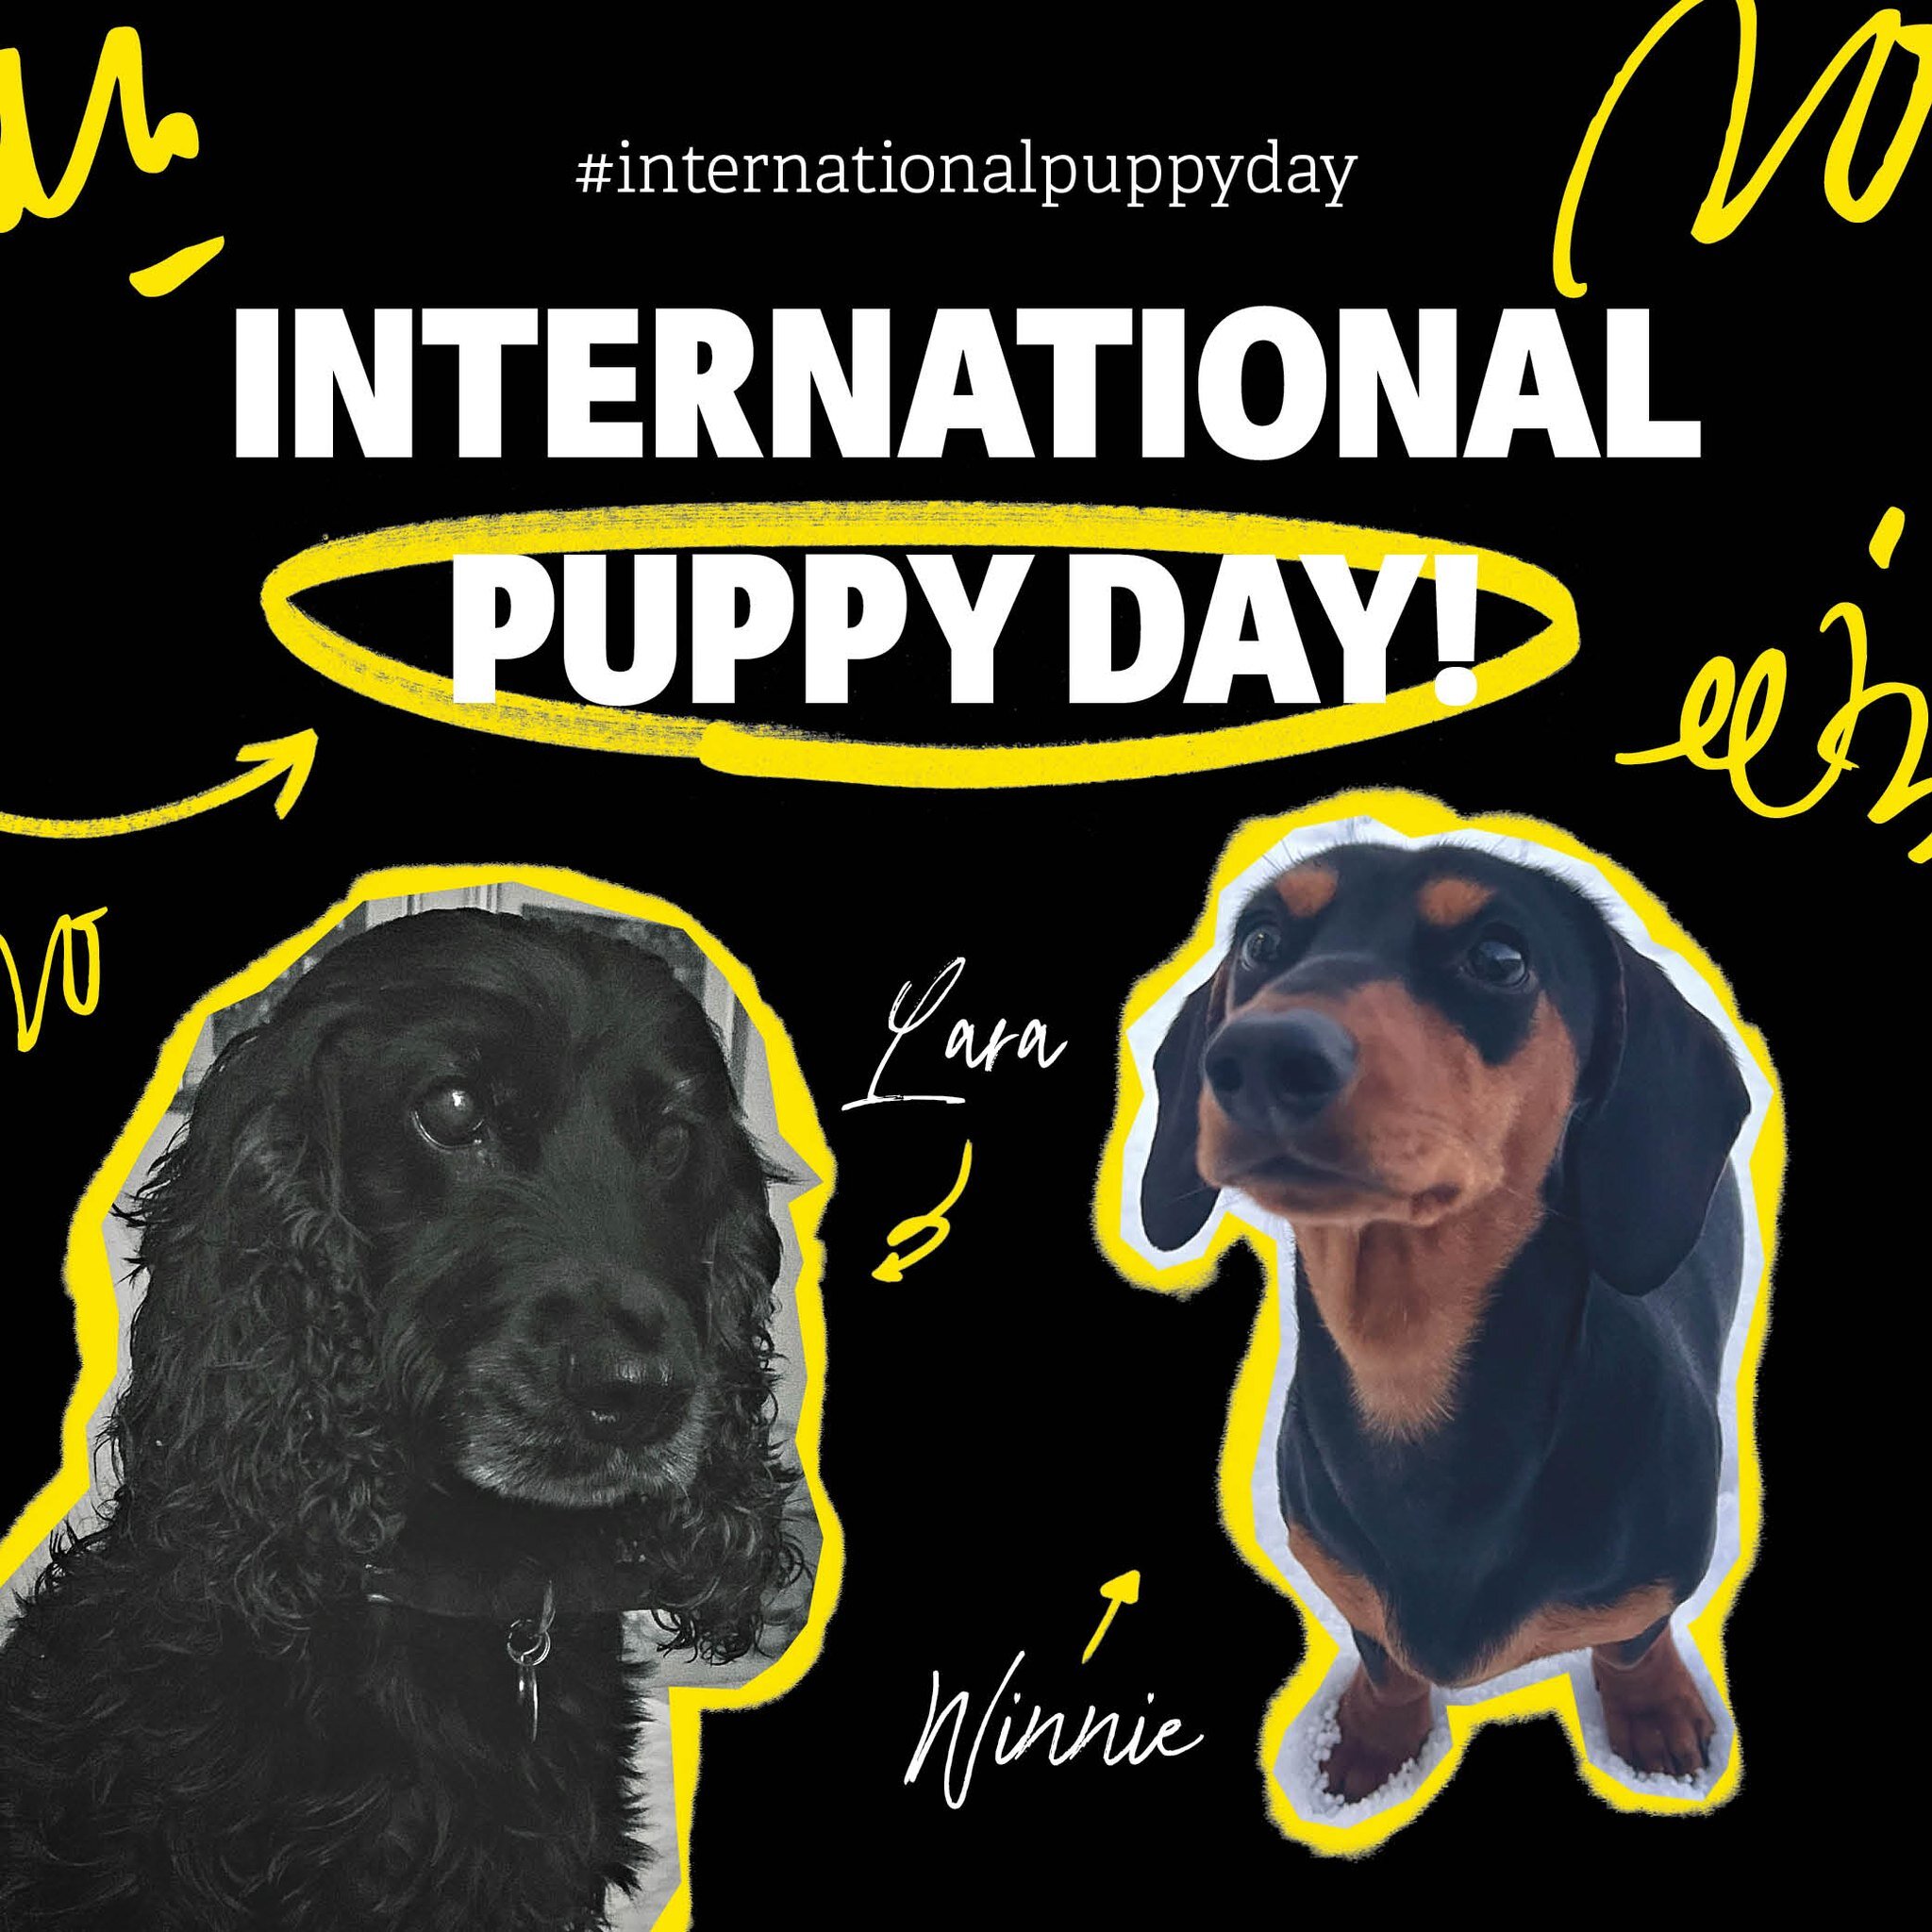 It's International Puppy Day! 🐾🐶

We'd love to introduce you to our teams fluffy members! Meet Lara the Cocker Spaniel and Winnie the Mini Dachshund...🥹

#puppyday #puppyday24 #internationalpuppyday